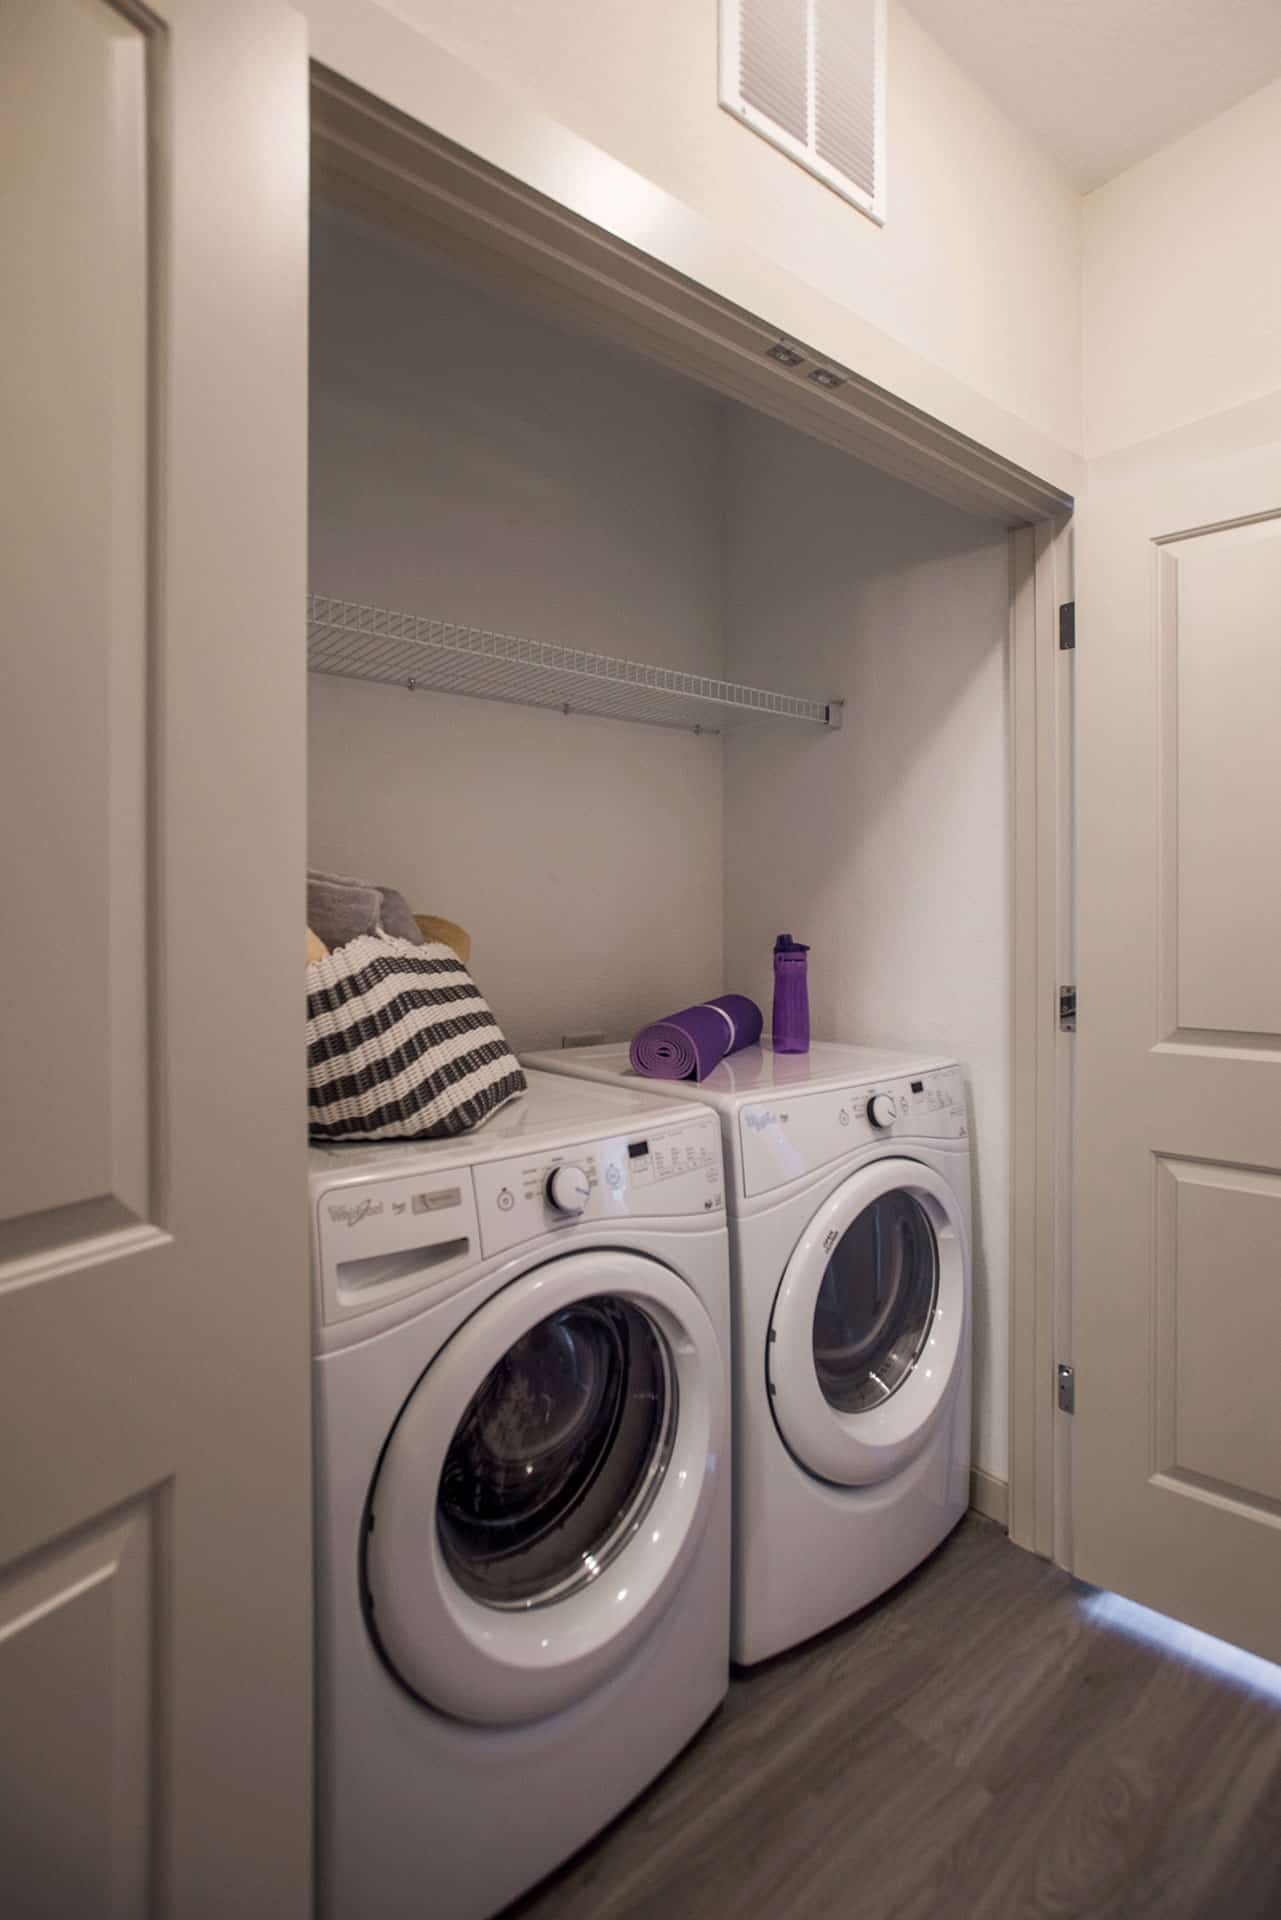 Closet with front load washer and dryer.